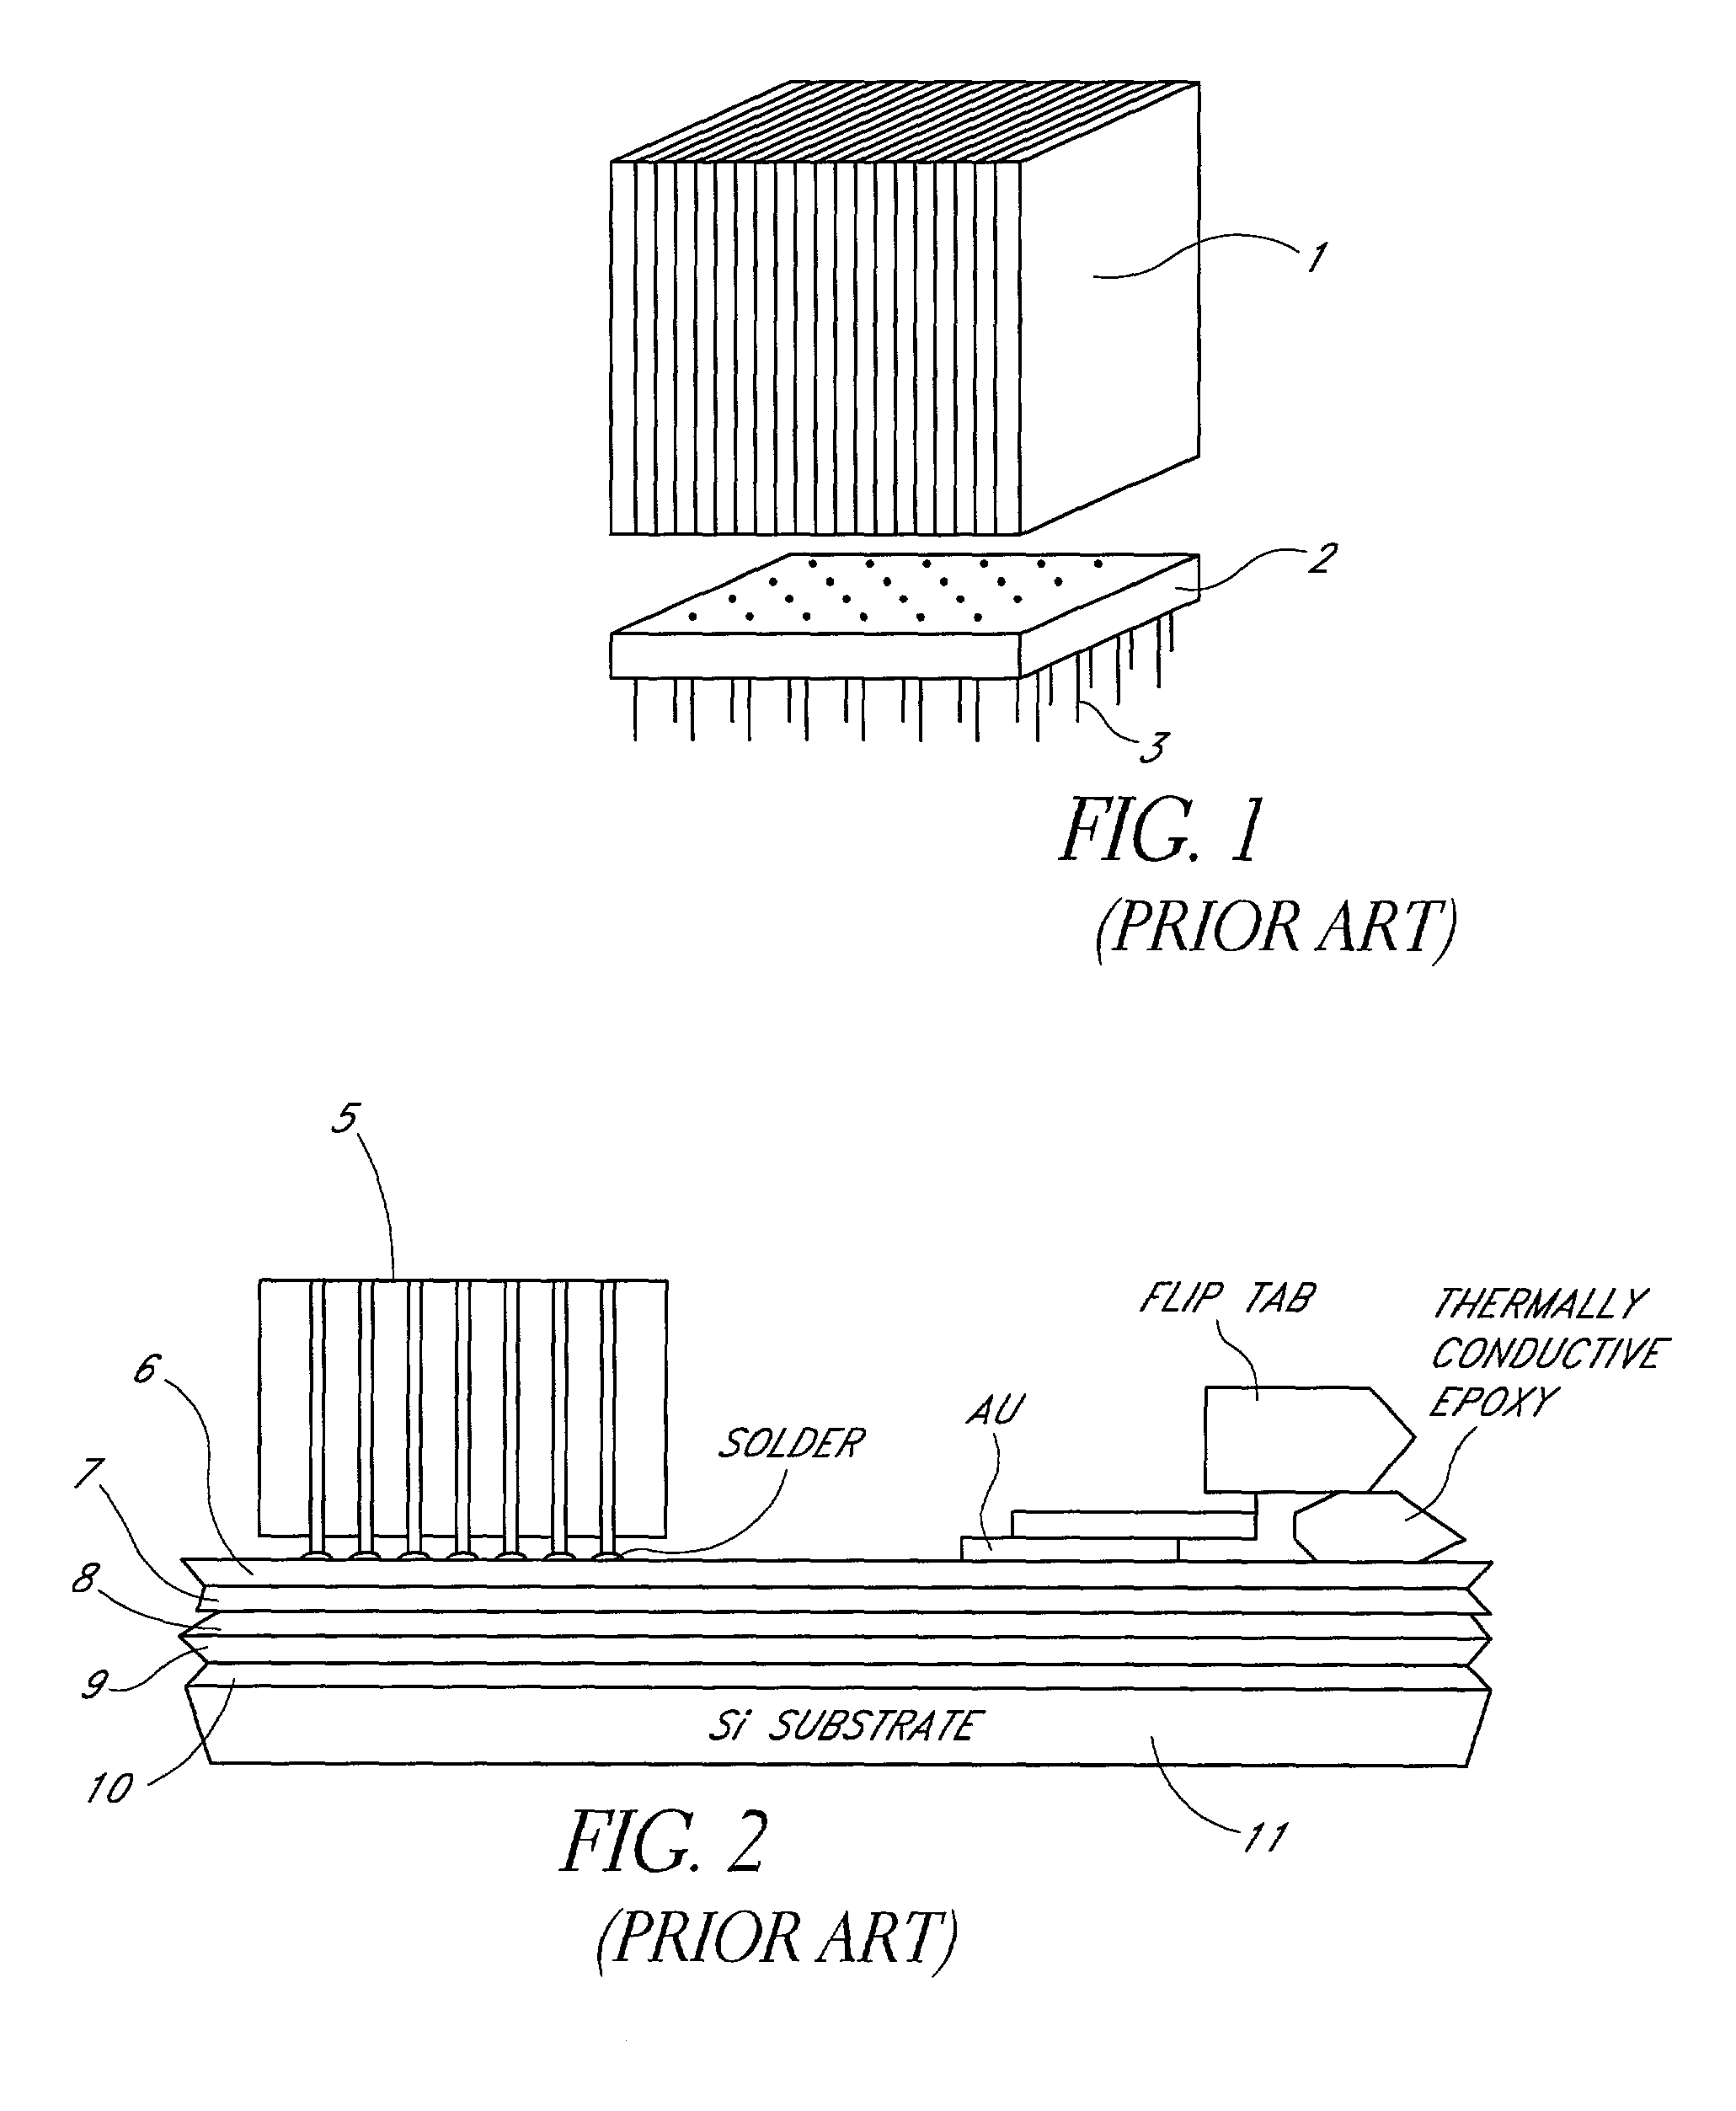 Method of transferring ultra-thin substrates and application of the method to the manufacture of a multi-layer thin film device